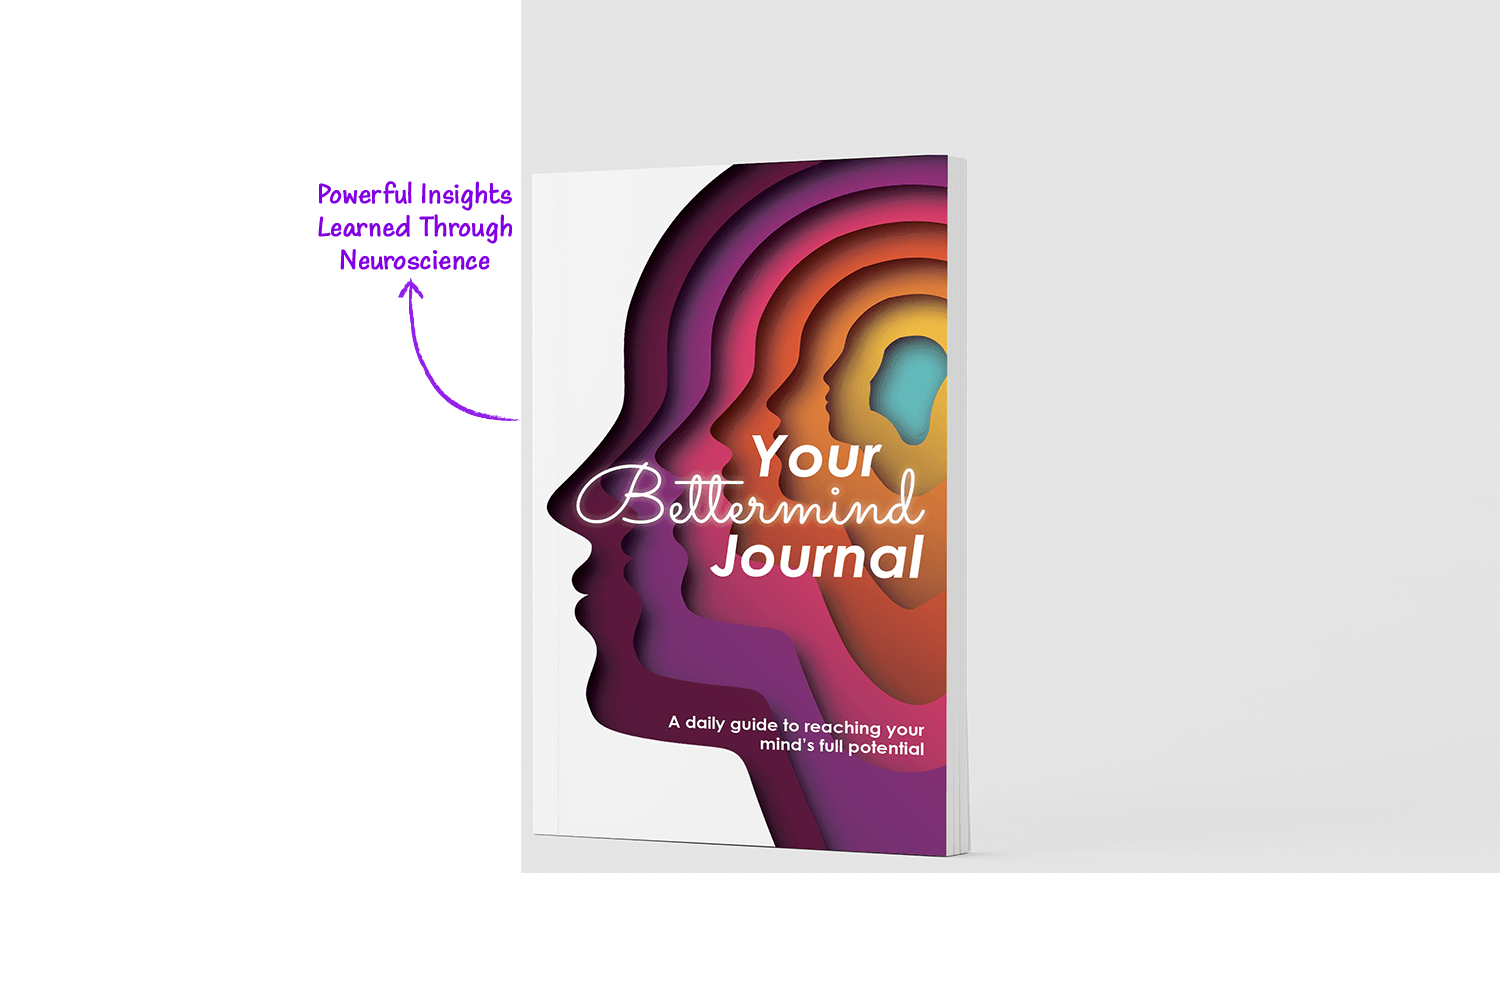 Your Bettermind Journal